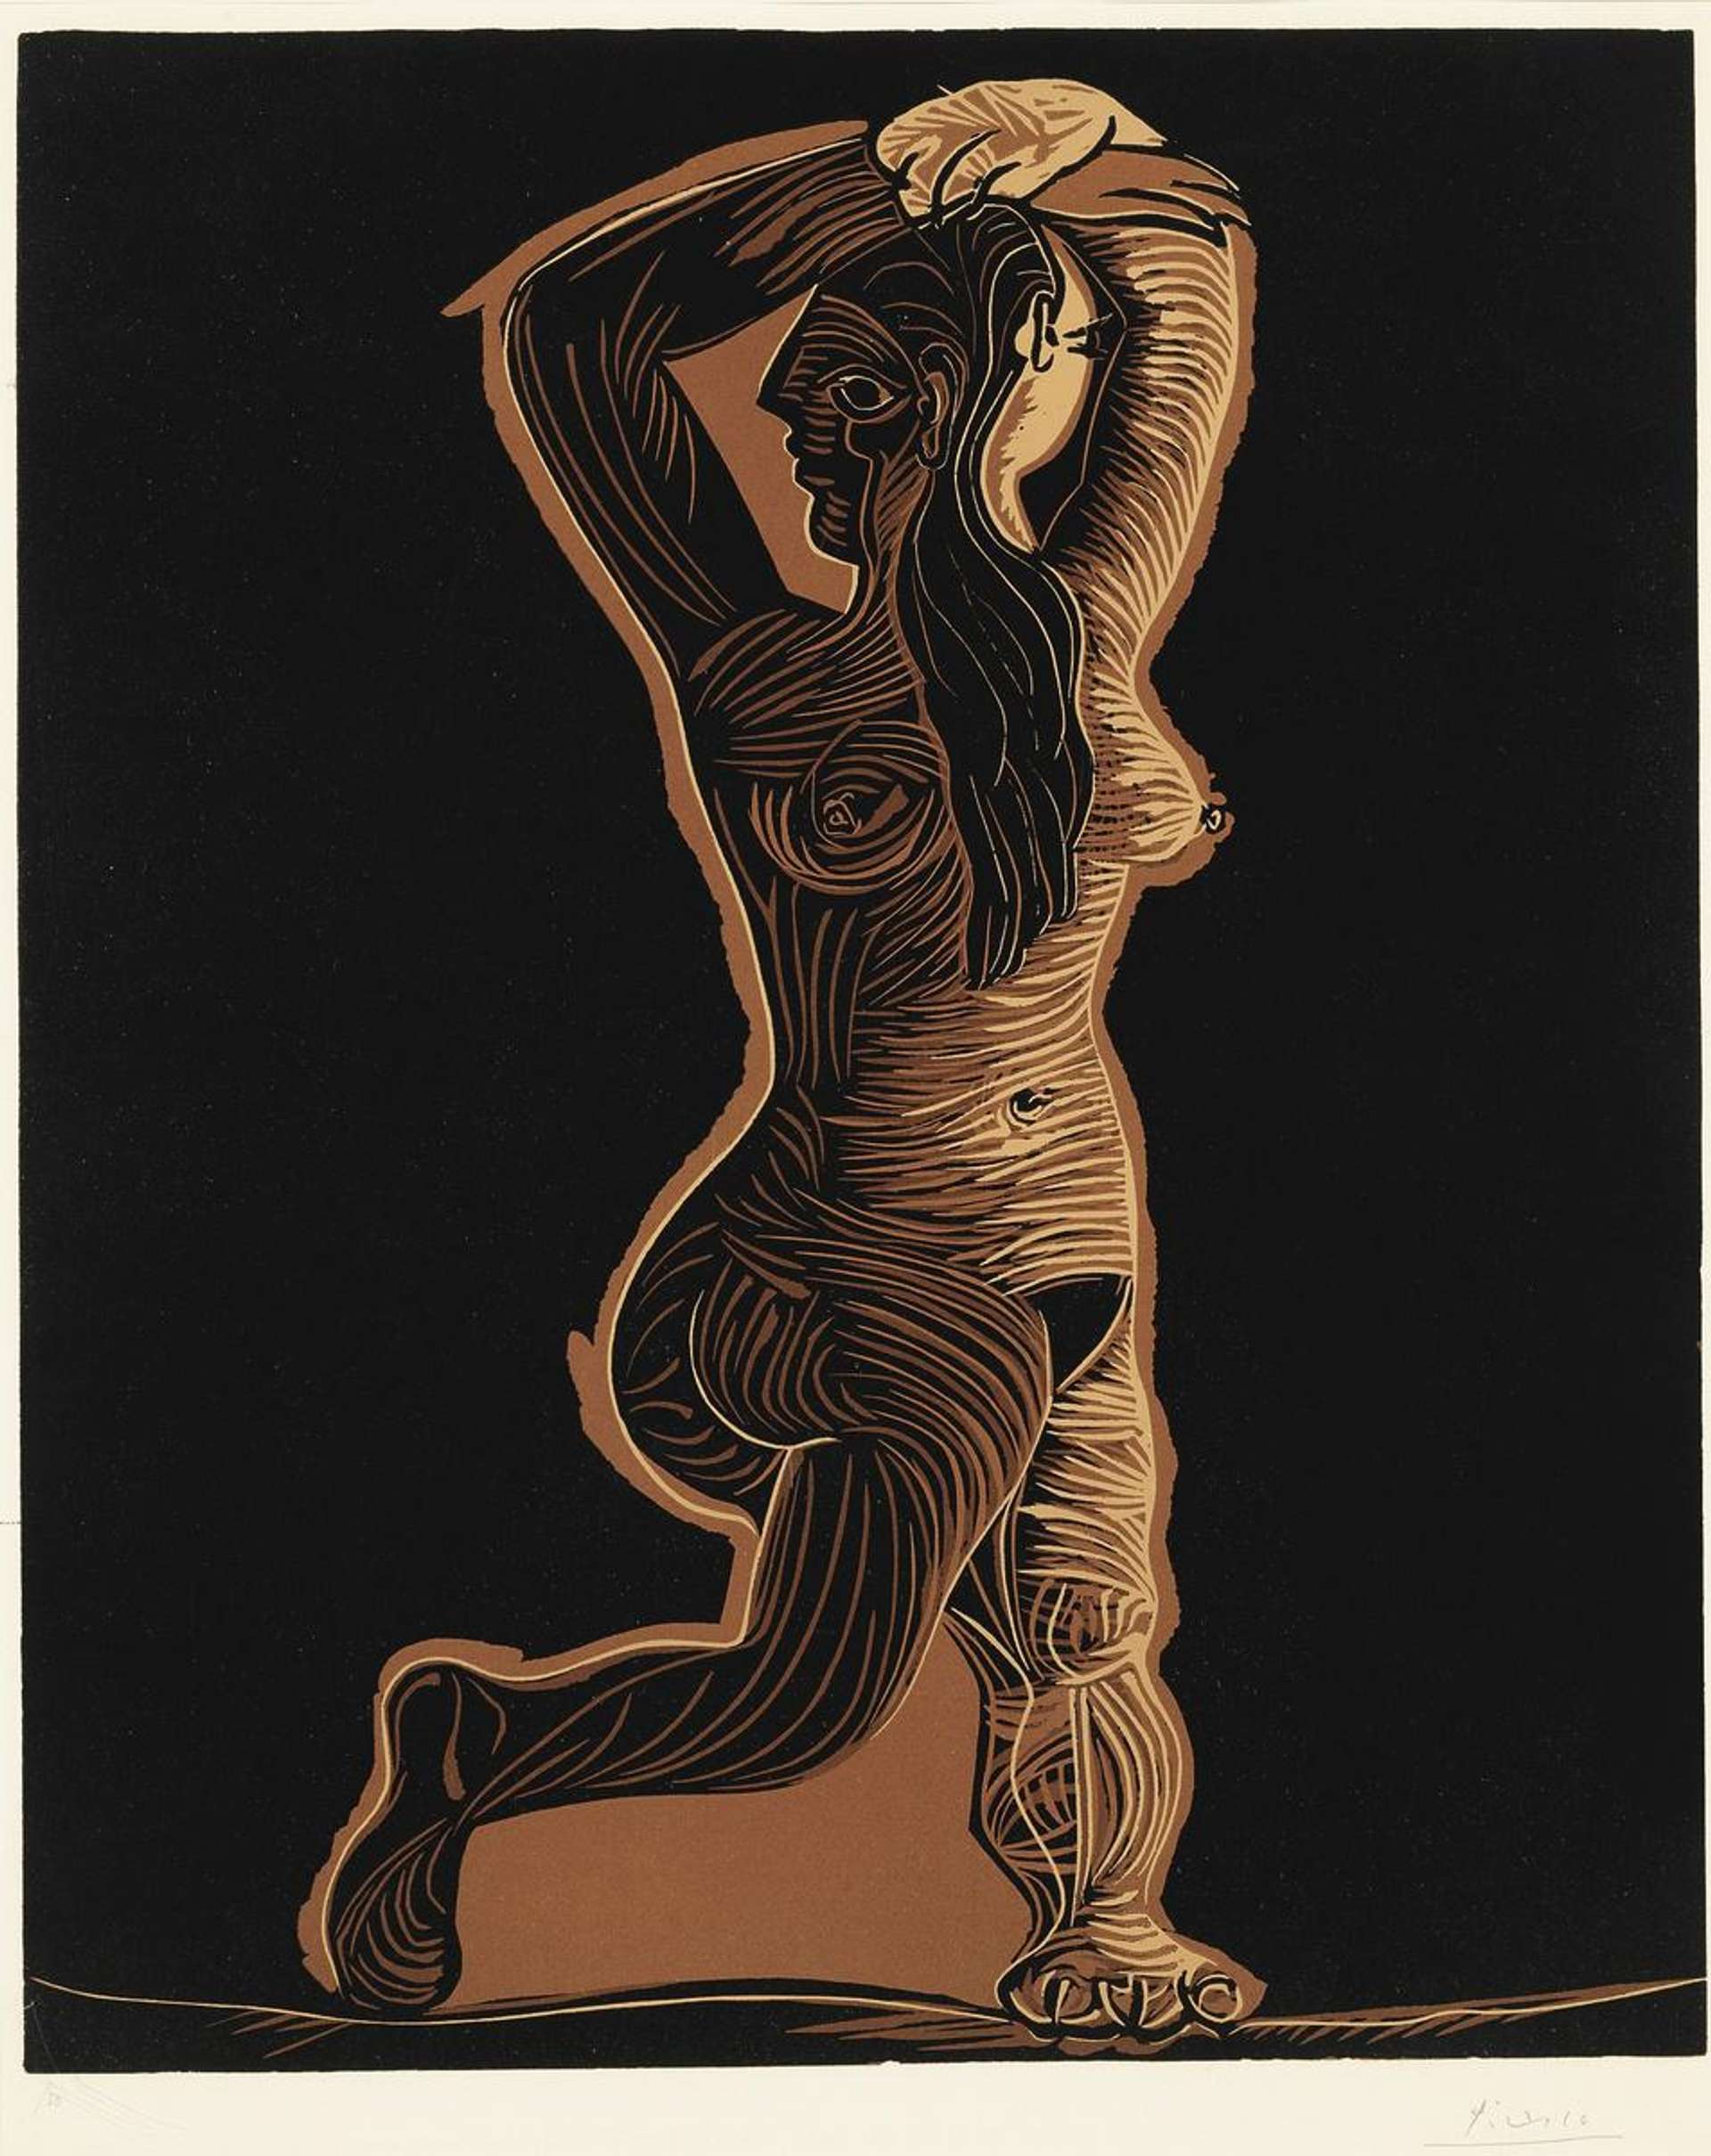 An image of a print by Pablo Picasso. It shows a nude female figure contorting her body. She is shown in brown and orange tones against a black background.